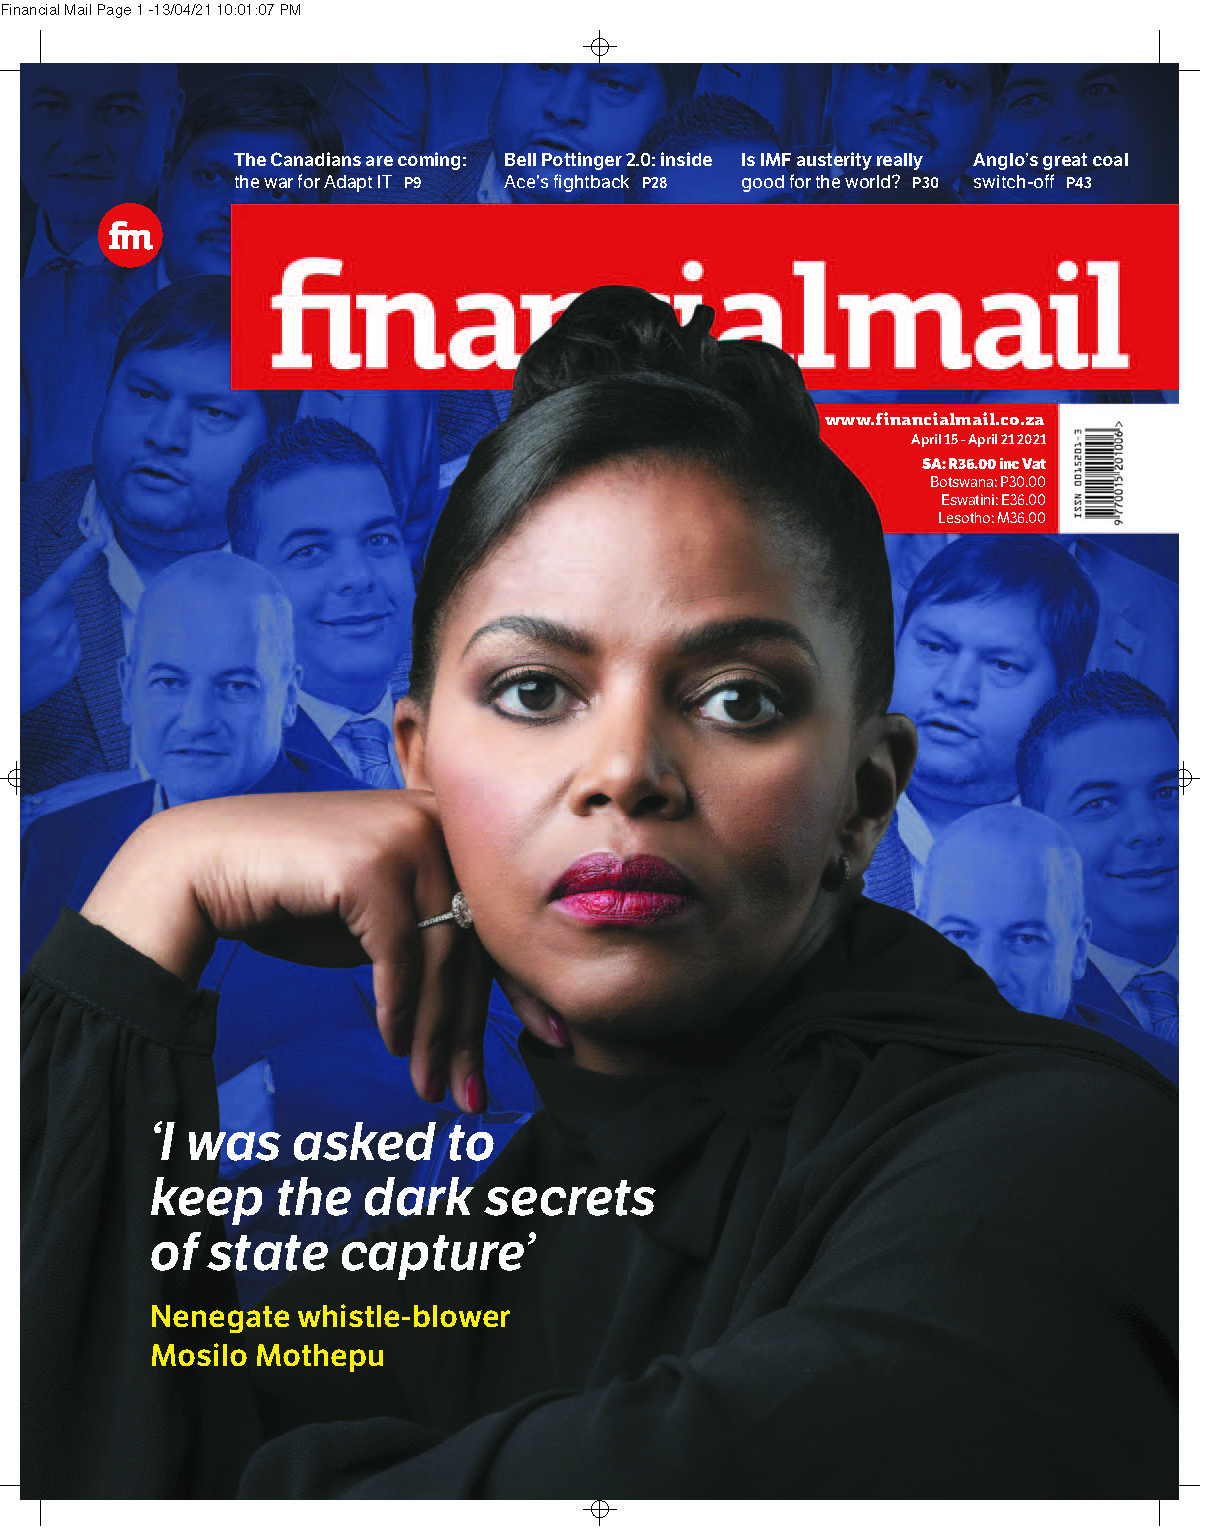 Financial Mail, South Africa